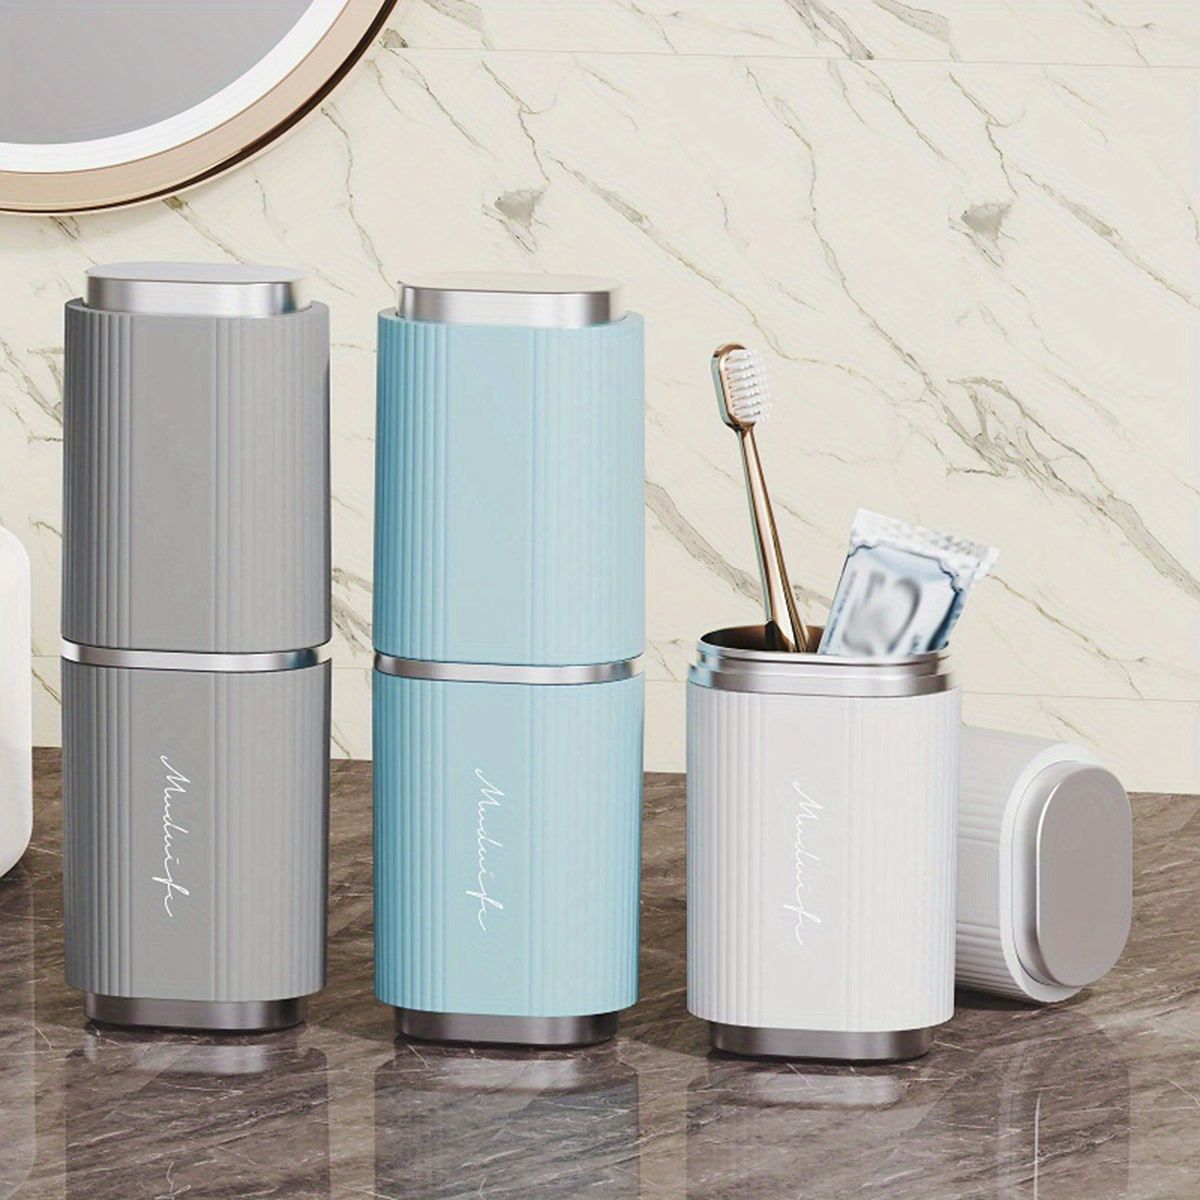 

1pc Portable Travel Toothbrush Holder - Compact, Lightweight & Luxurious Design For Business Trips And Outdoor Use